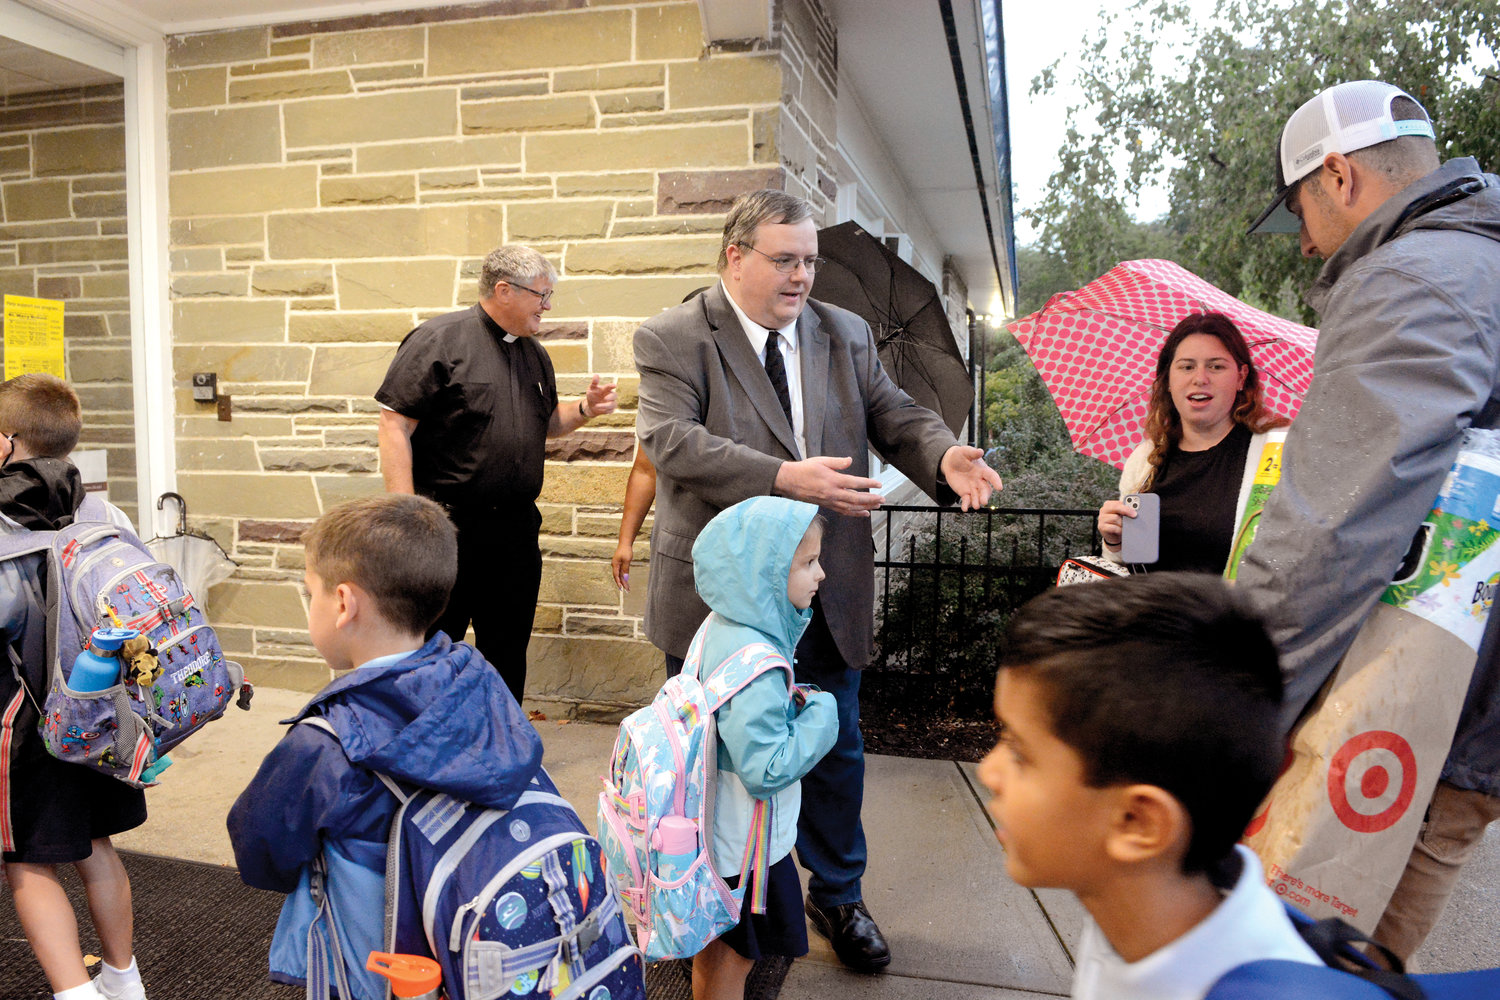 SCHOOL YEAR BEGINS—The wet skies did not deter students of St. Mary’s School in Fishkill on their first day of school Sept. 6. Above, principal Tom Hamilton gladly accepts supplies from parents dropping off their children near the entrance of the pre-K to grade school in Dutchess County. In the background, Father Joseph Blenkle, the pastor of St. Mary, Mother of the Church, joins the first-day activity.